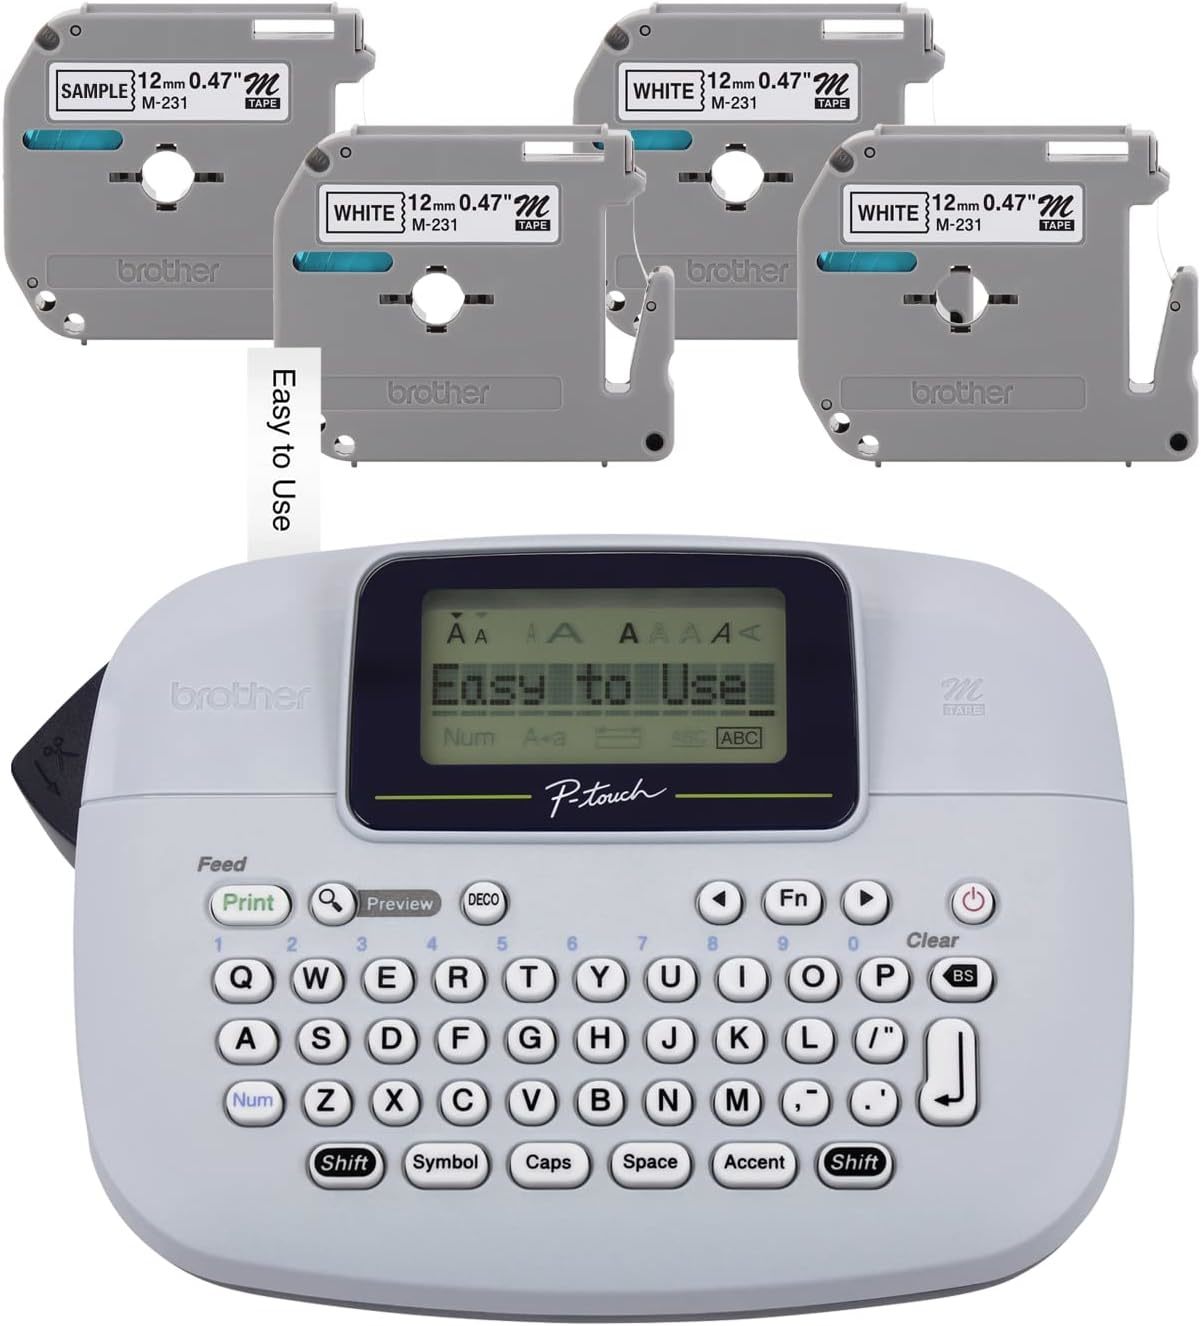 UBICON Handheld Multi Function Tape Label Maker Machine for Organizing Home  and Office, Compatible with Many Label Sizes and Colors